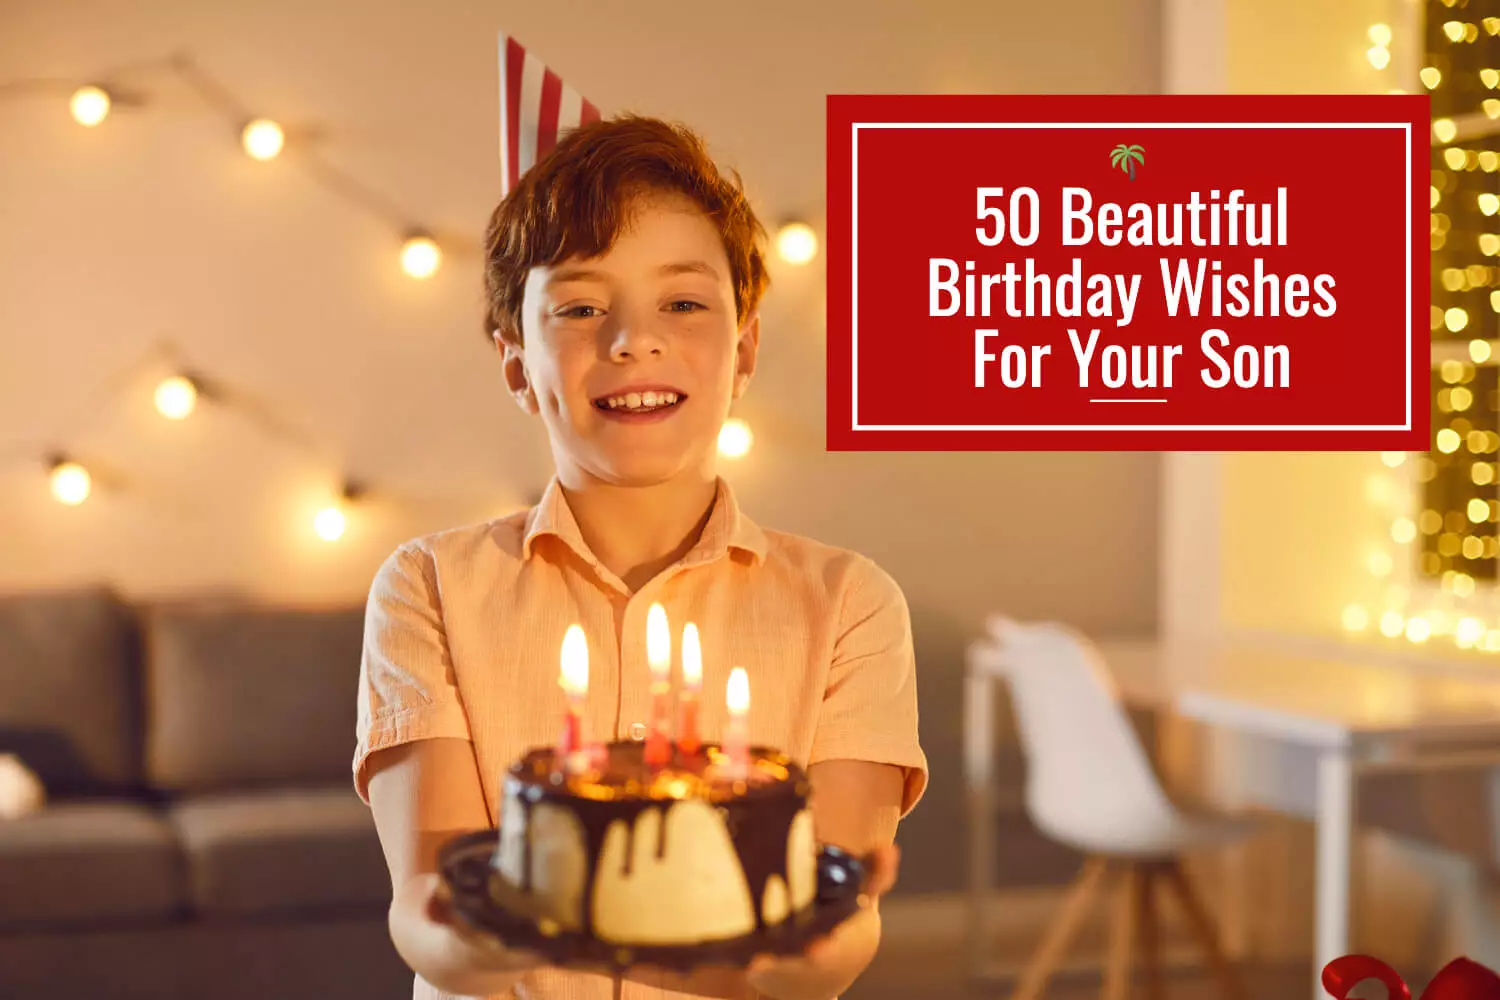 100 Beautiful Birthday Wishes For Your Son - Being The Parent